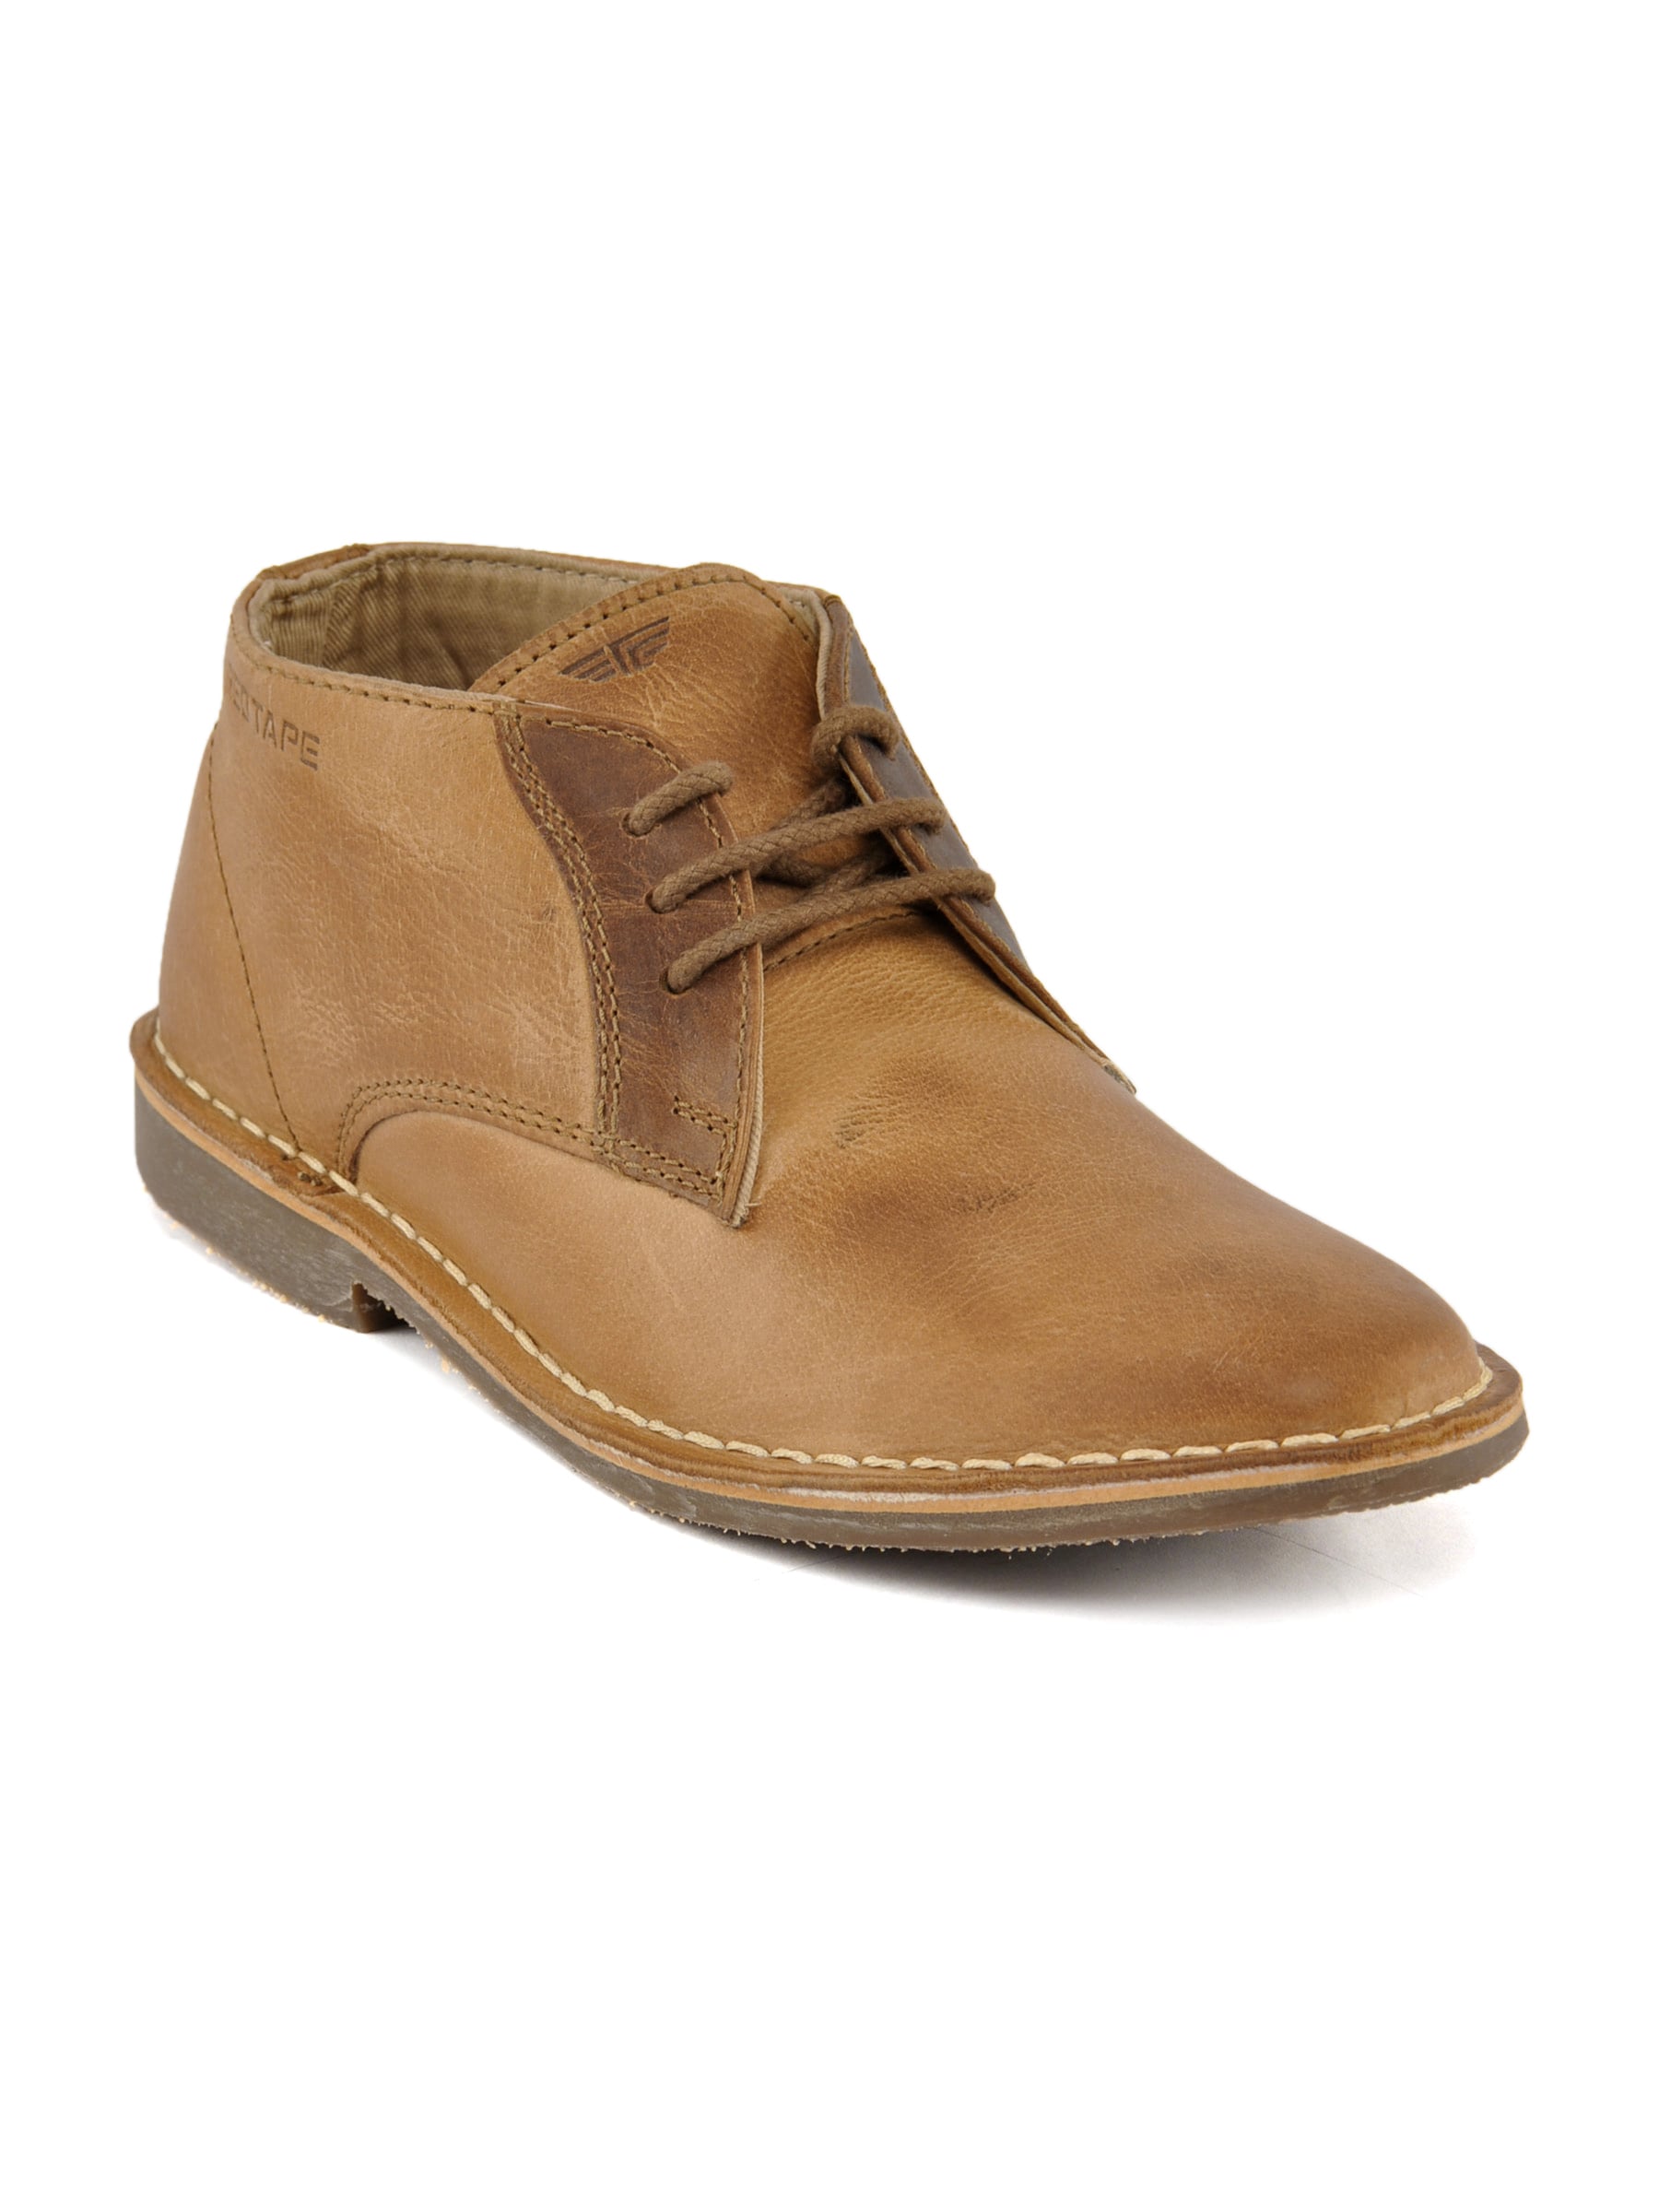 Redtape Men Candy Tan Casual Shoes